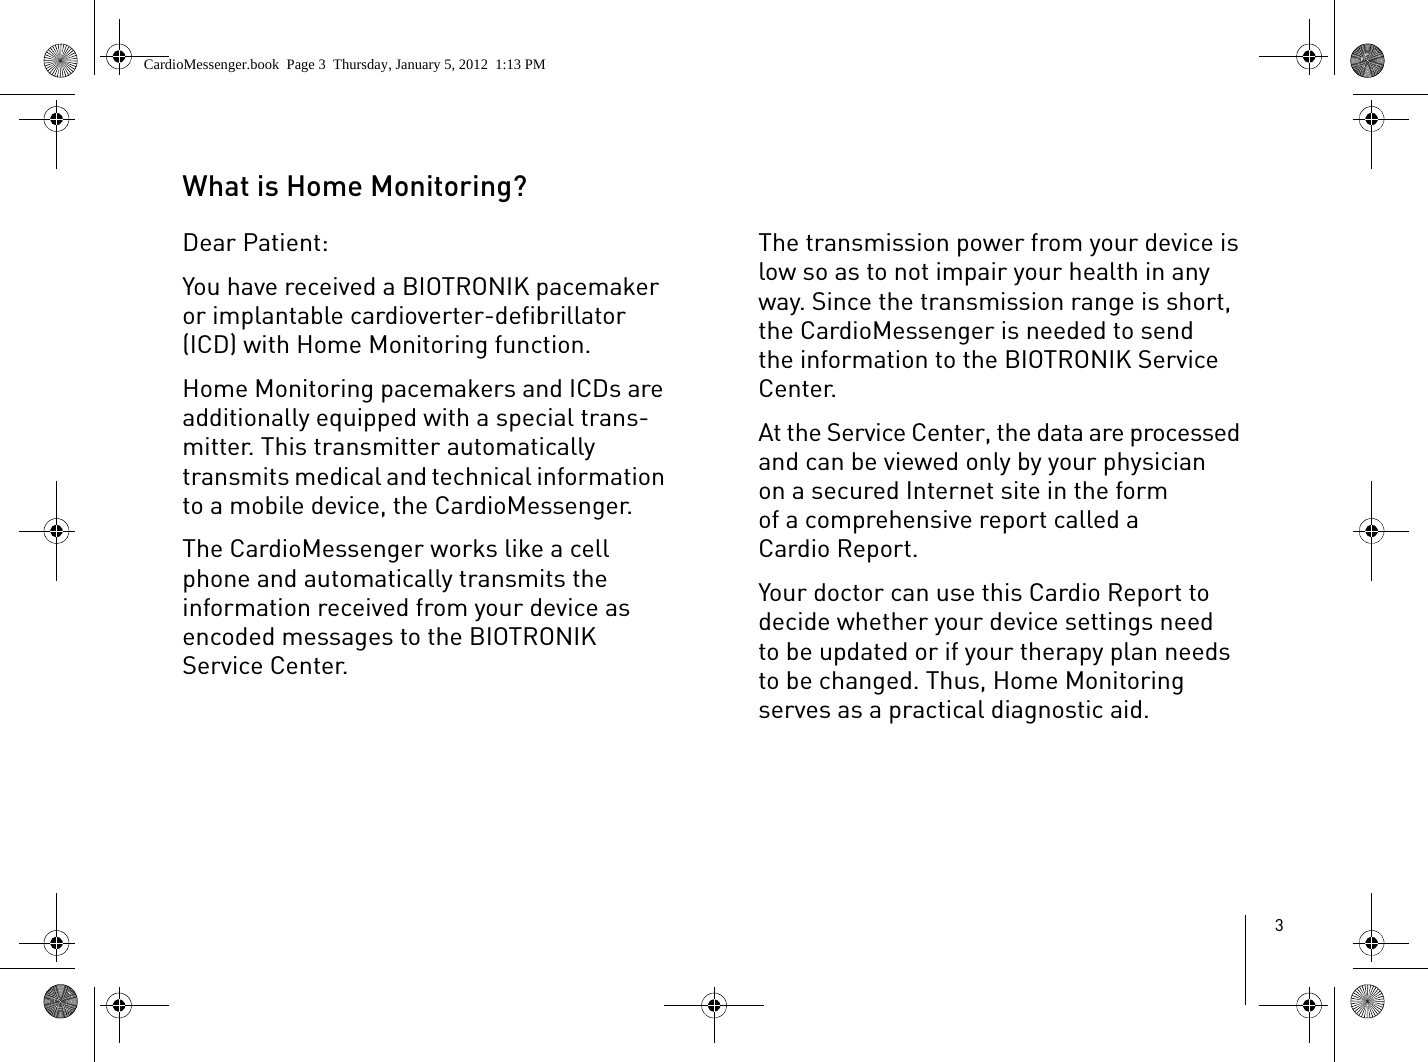 3What is Home Monitoring?Dear Patient:You have received a BIOTRONIK pacemaker or implantable cardioverter-defibrillator (ICD) with Home Monitoring function. Home Monitoring pacemakers and ICDs are additionally equipped with a special trans-mitter. This transmitter automatically transmits medical and technical information to a mobile device, the CardioMessenger. The CardioMessenger works like a cell phone and automatically transmits the information received from your device as encoded messages to the BIOTRONIK Service Center.The transmission power from your device is low so as to not impair your health in any way. Since the transmission range is short, the CardioMessenger is needed to send the information to the BIOTRONIK Service Center.At the Service Center, the data are processed and can be viewed only by your physician on a secured Internet site in the form of a comprehensive report called a Cardio Report. Your doctor can use this Cardio Report to decide whether your device settings need to be updated or if your therapy plan needs to be changed. Thus, Home Monitoring serves as a practical diagnostic aid.CardioMessenger.book  Page 3  Thursday, January 5, 2012  1:13 PM